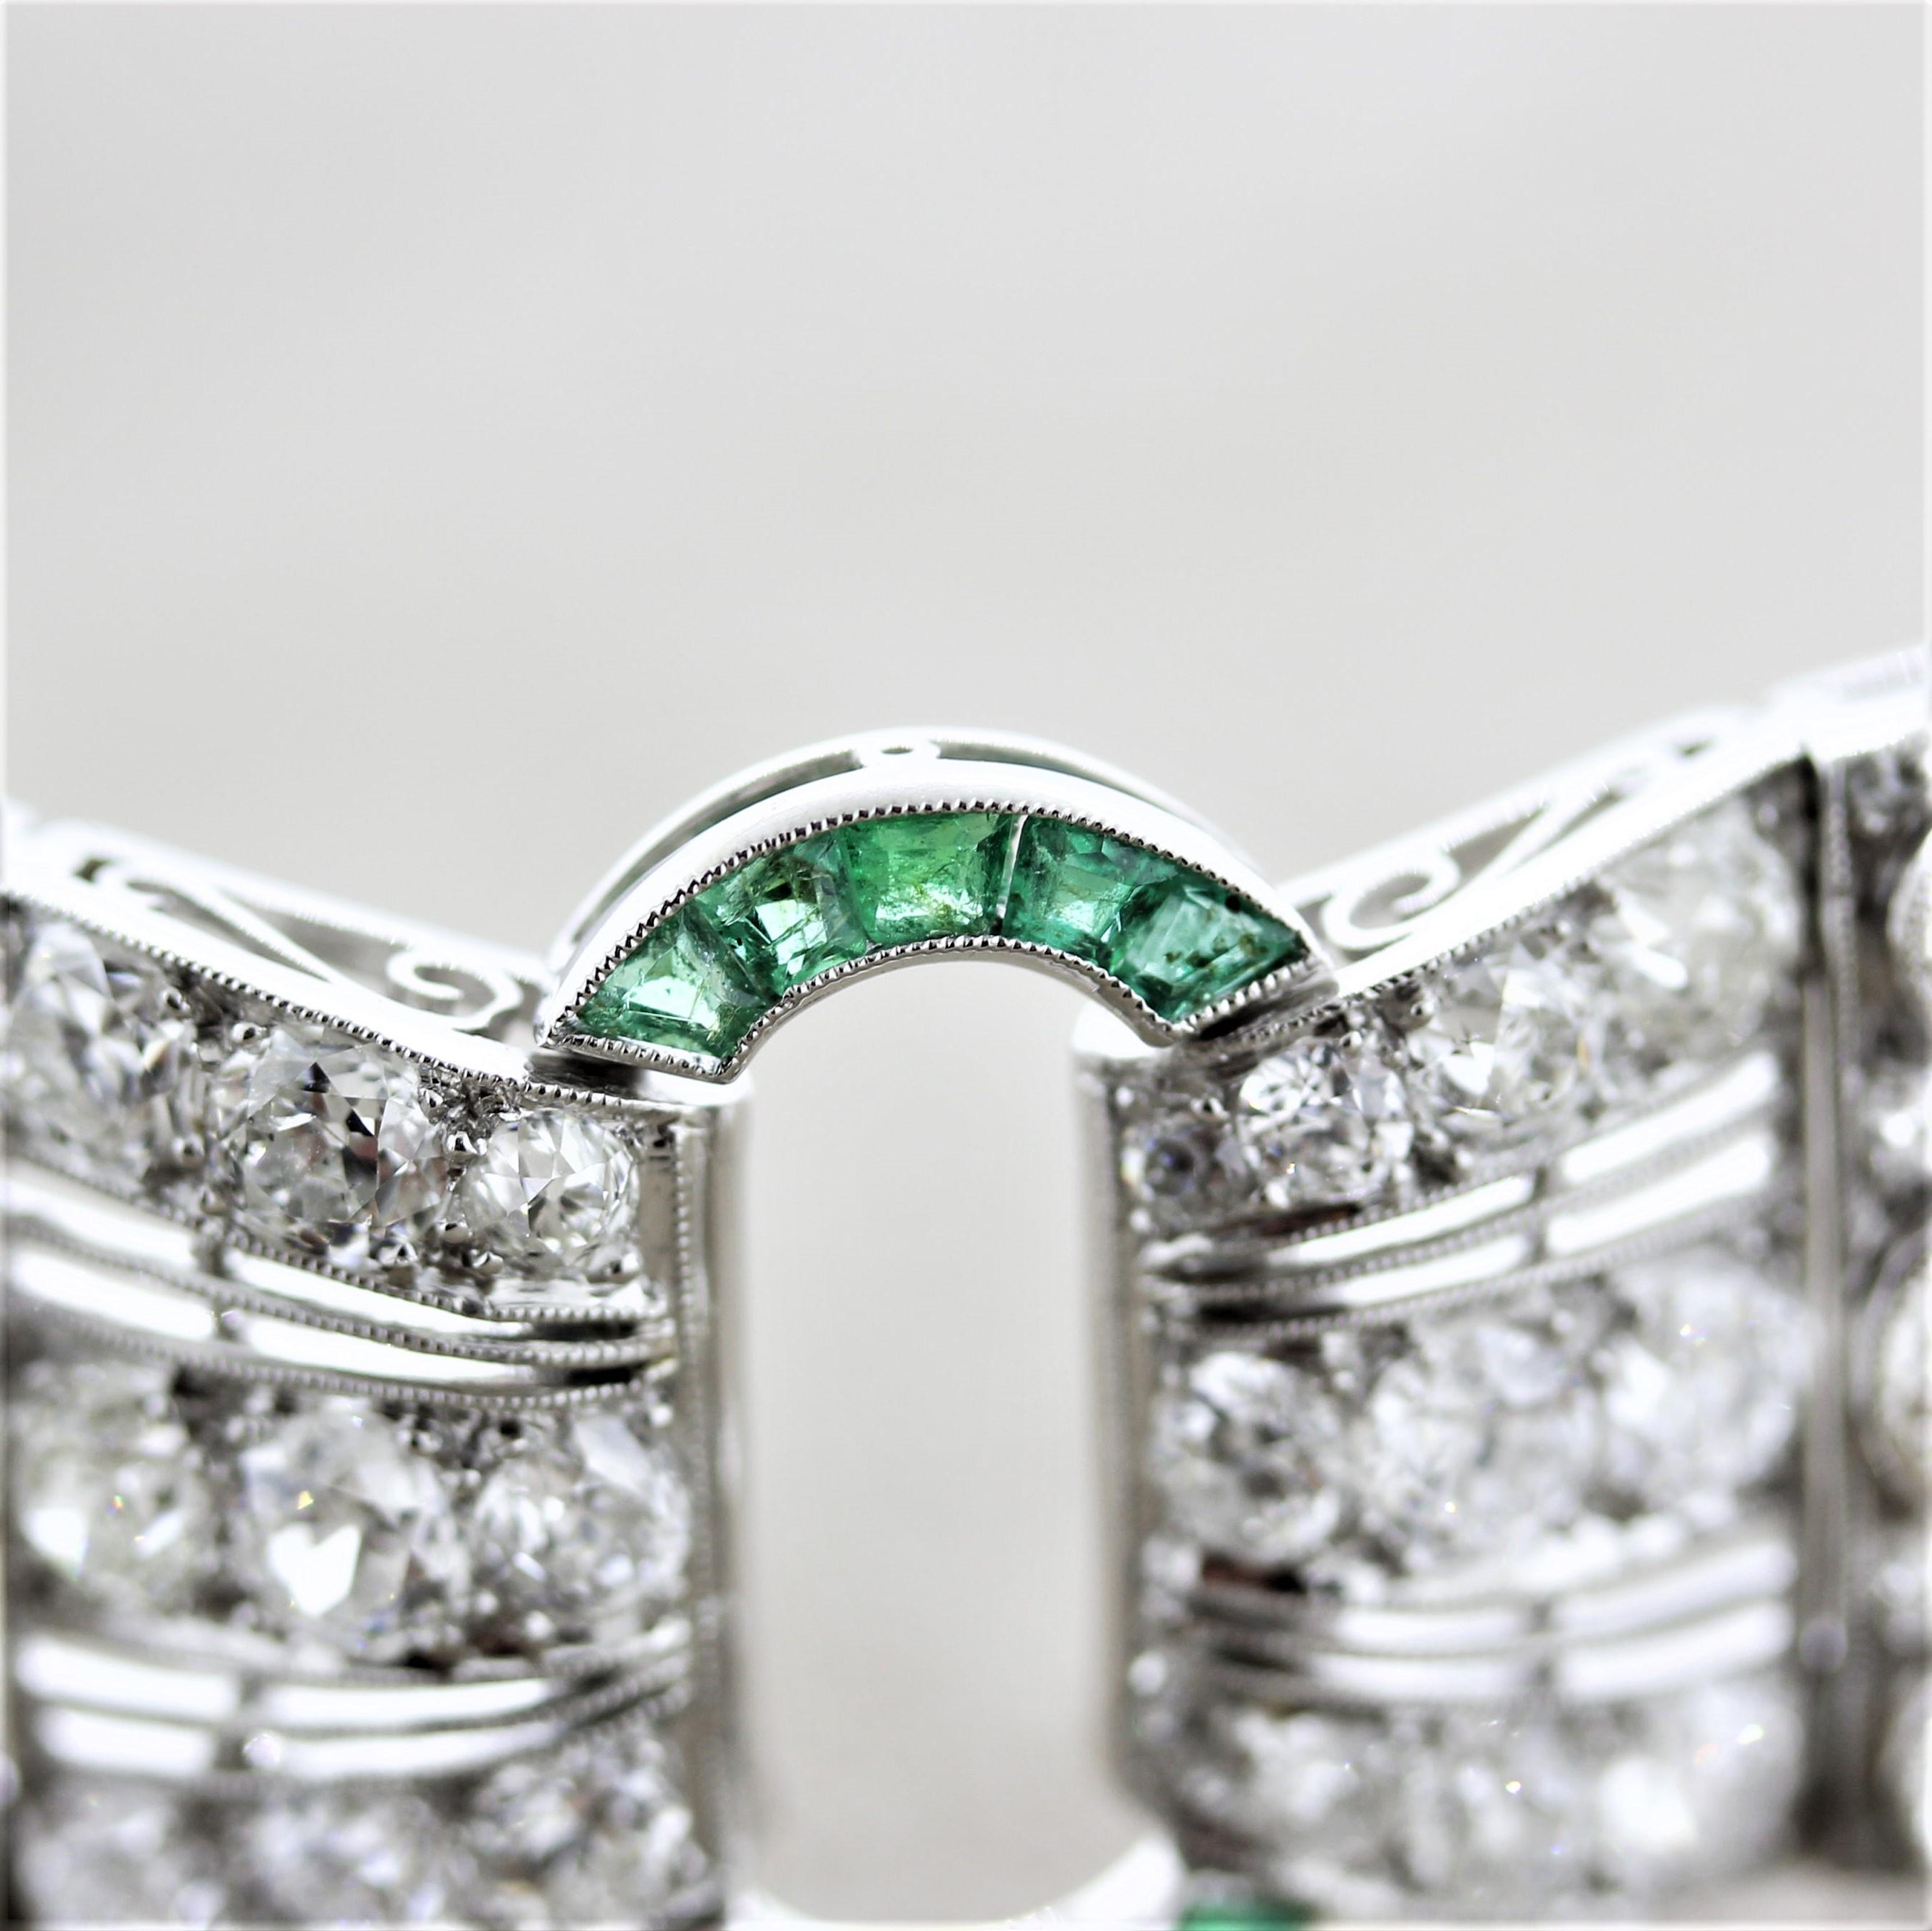 Magnificent French Art Deco Diamond Emerald Platinum Bracelet In Excellent Condition For Sale In Beverly Hills, CA